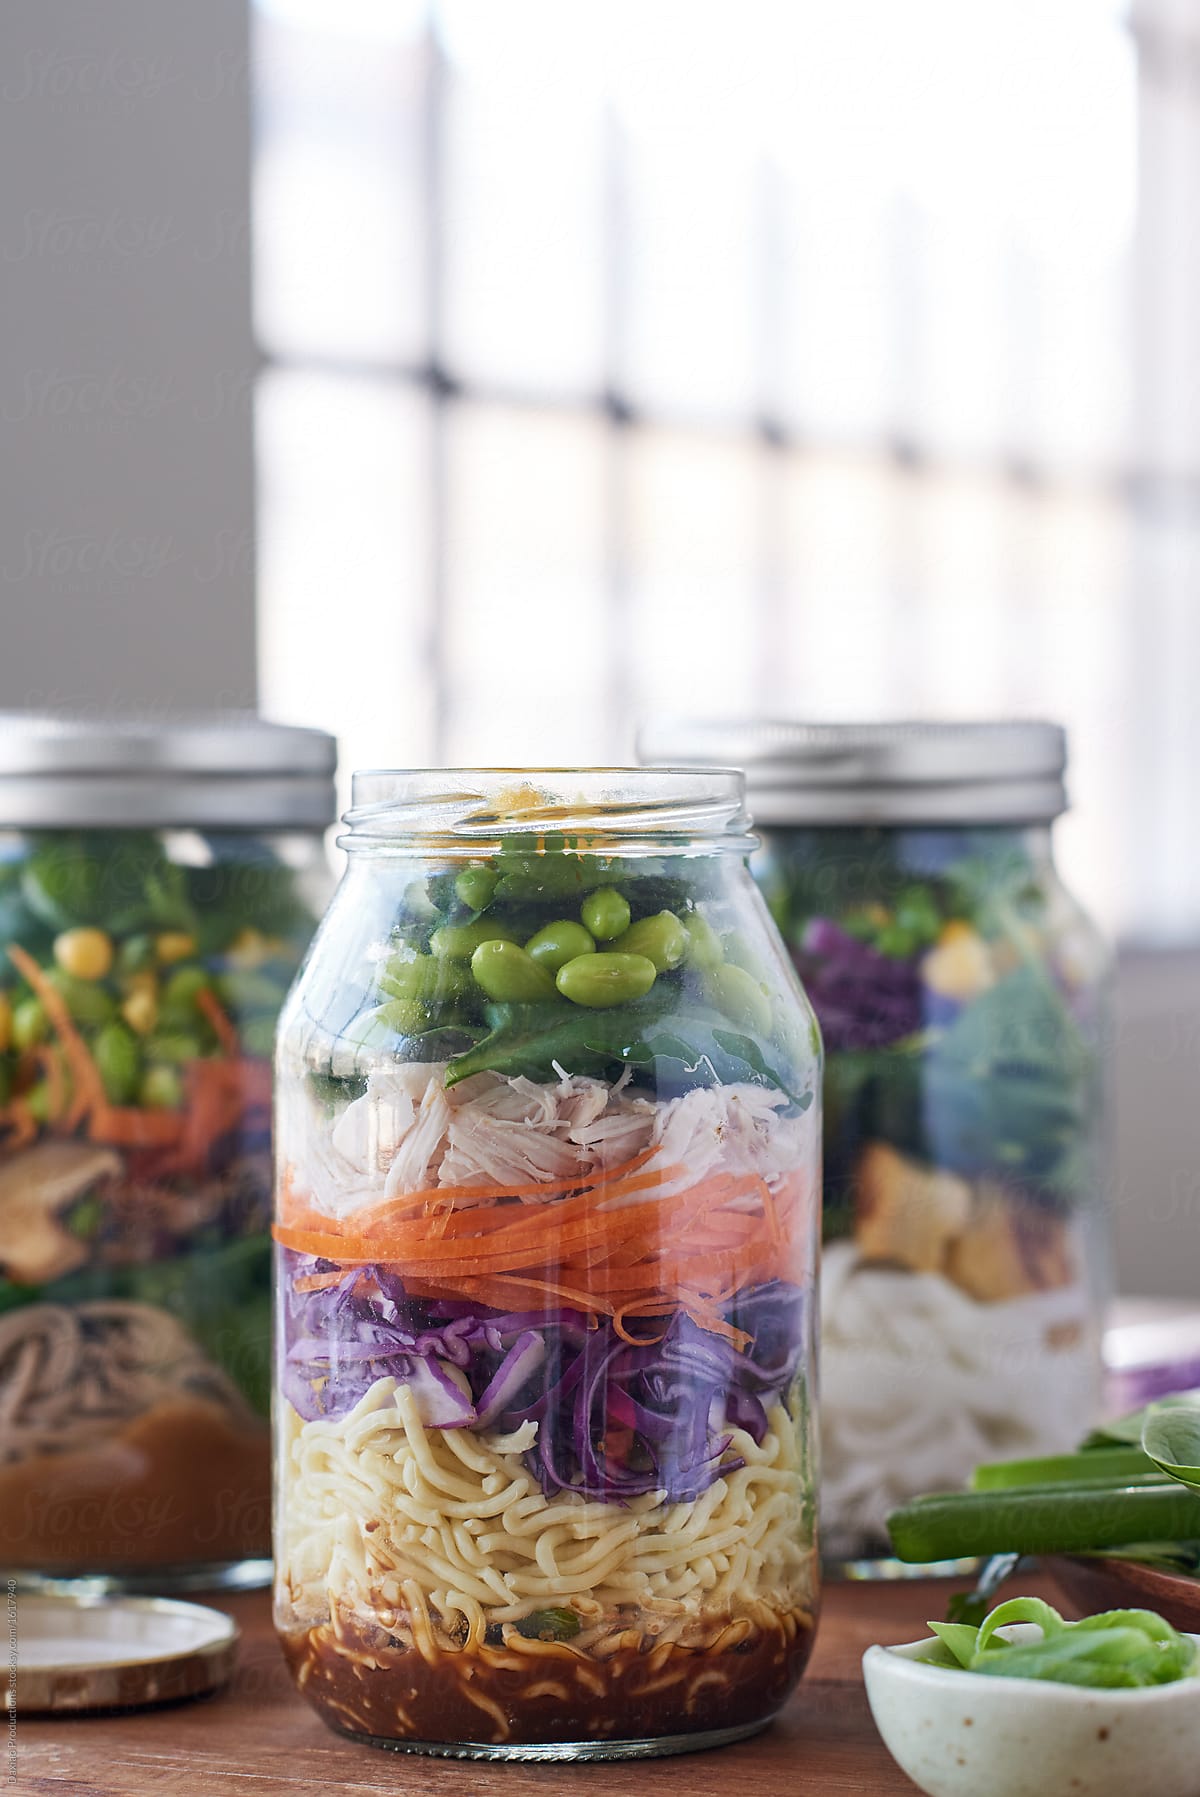 Lunch salad jars on kitchen counter